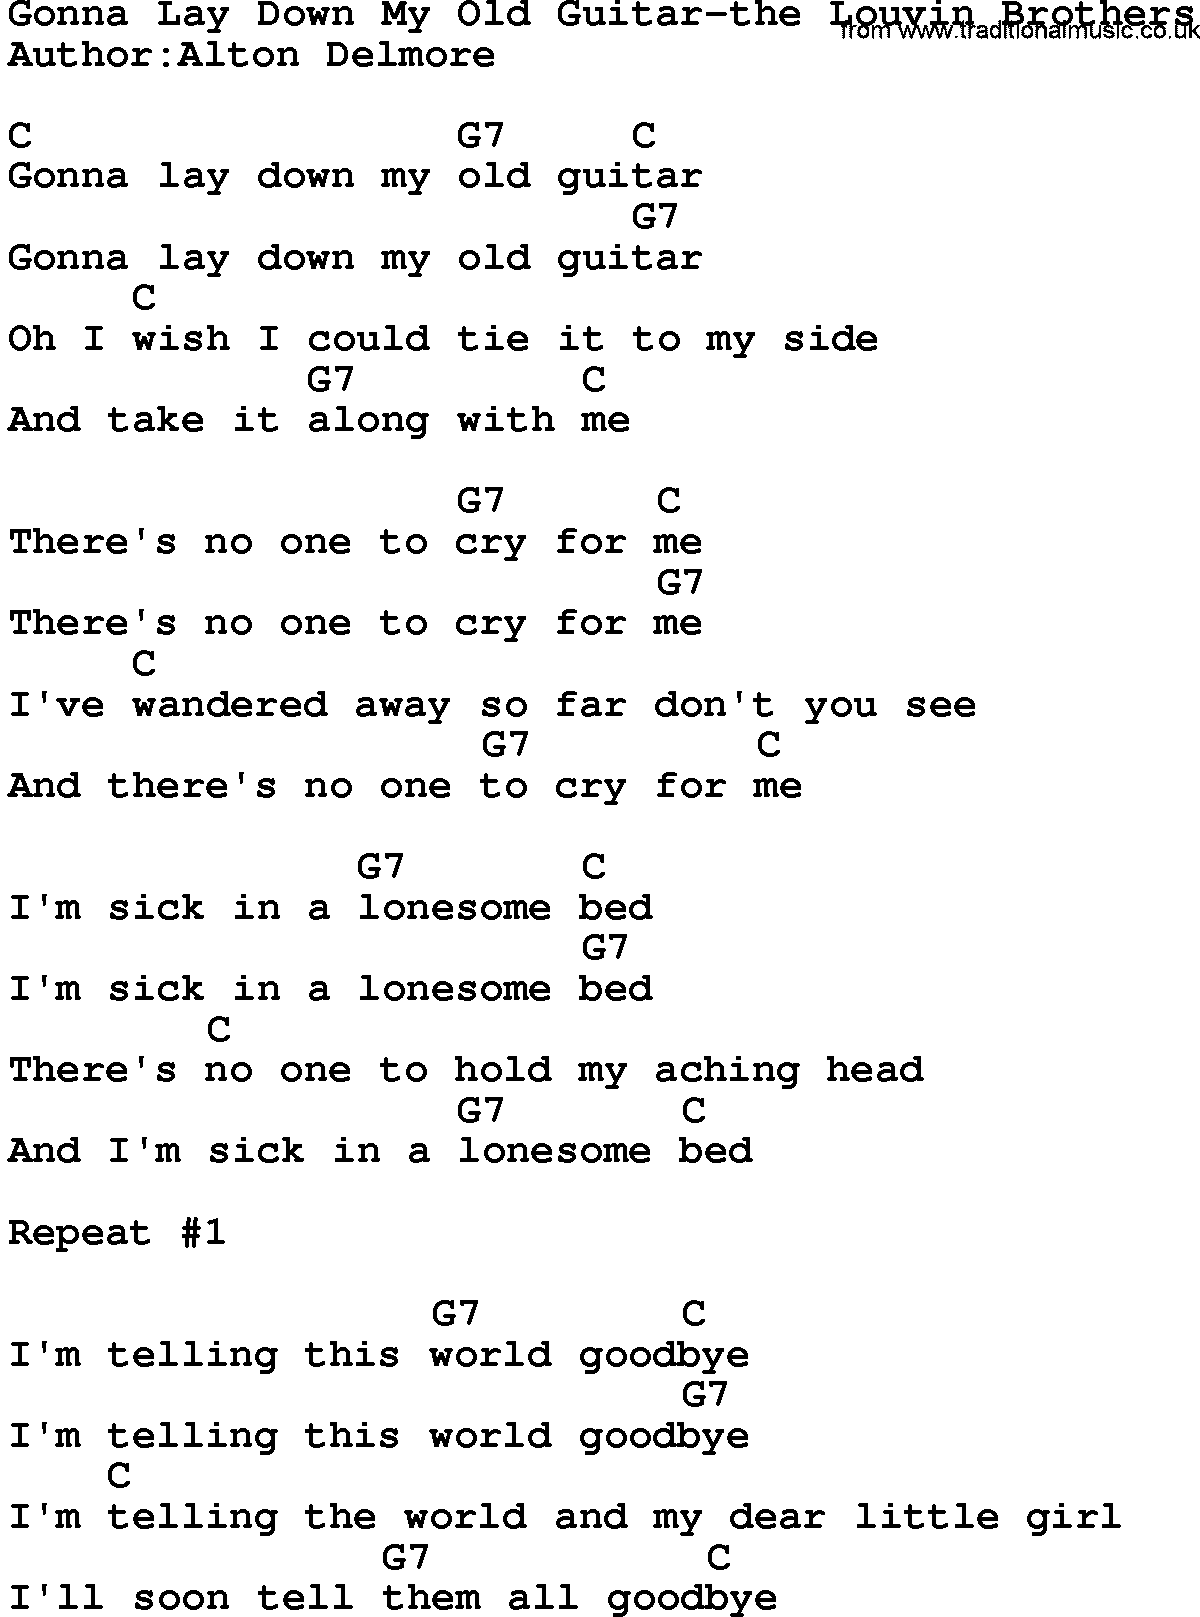 Country music song: Gonna Lay Down My Old Guitar-The Louvin Brothers lyrics and chords